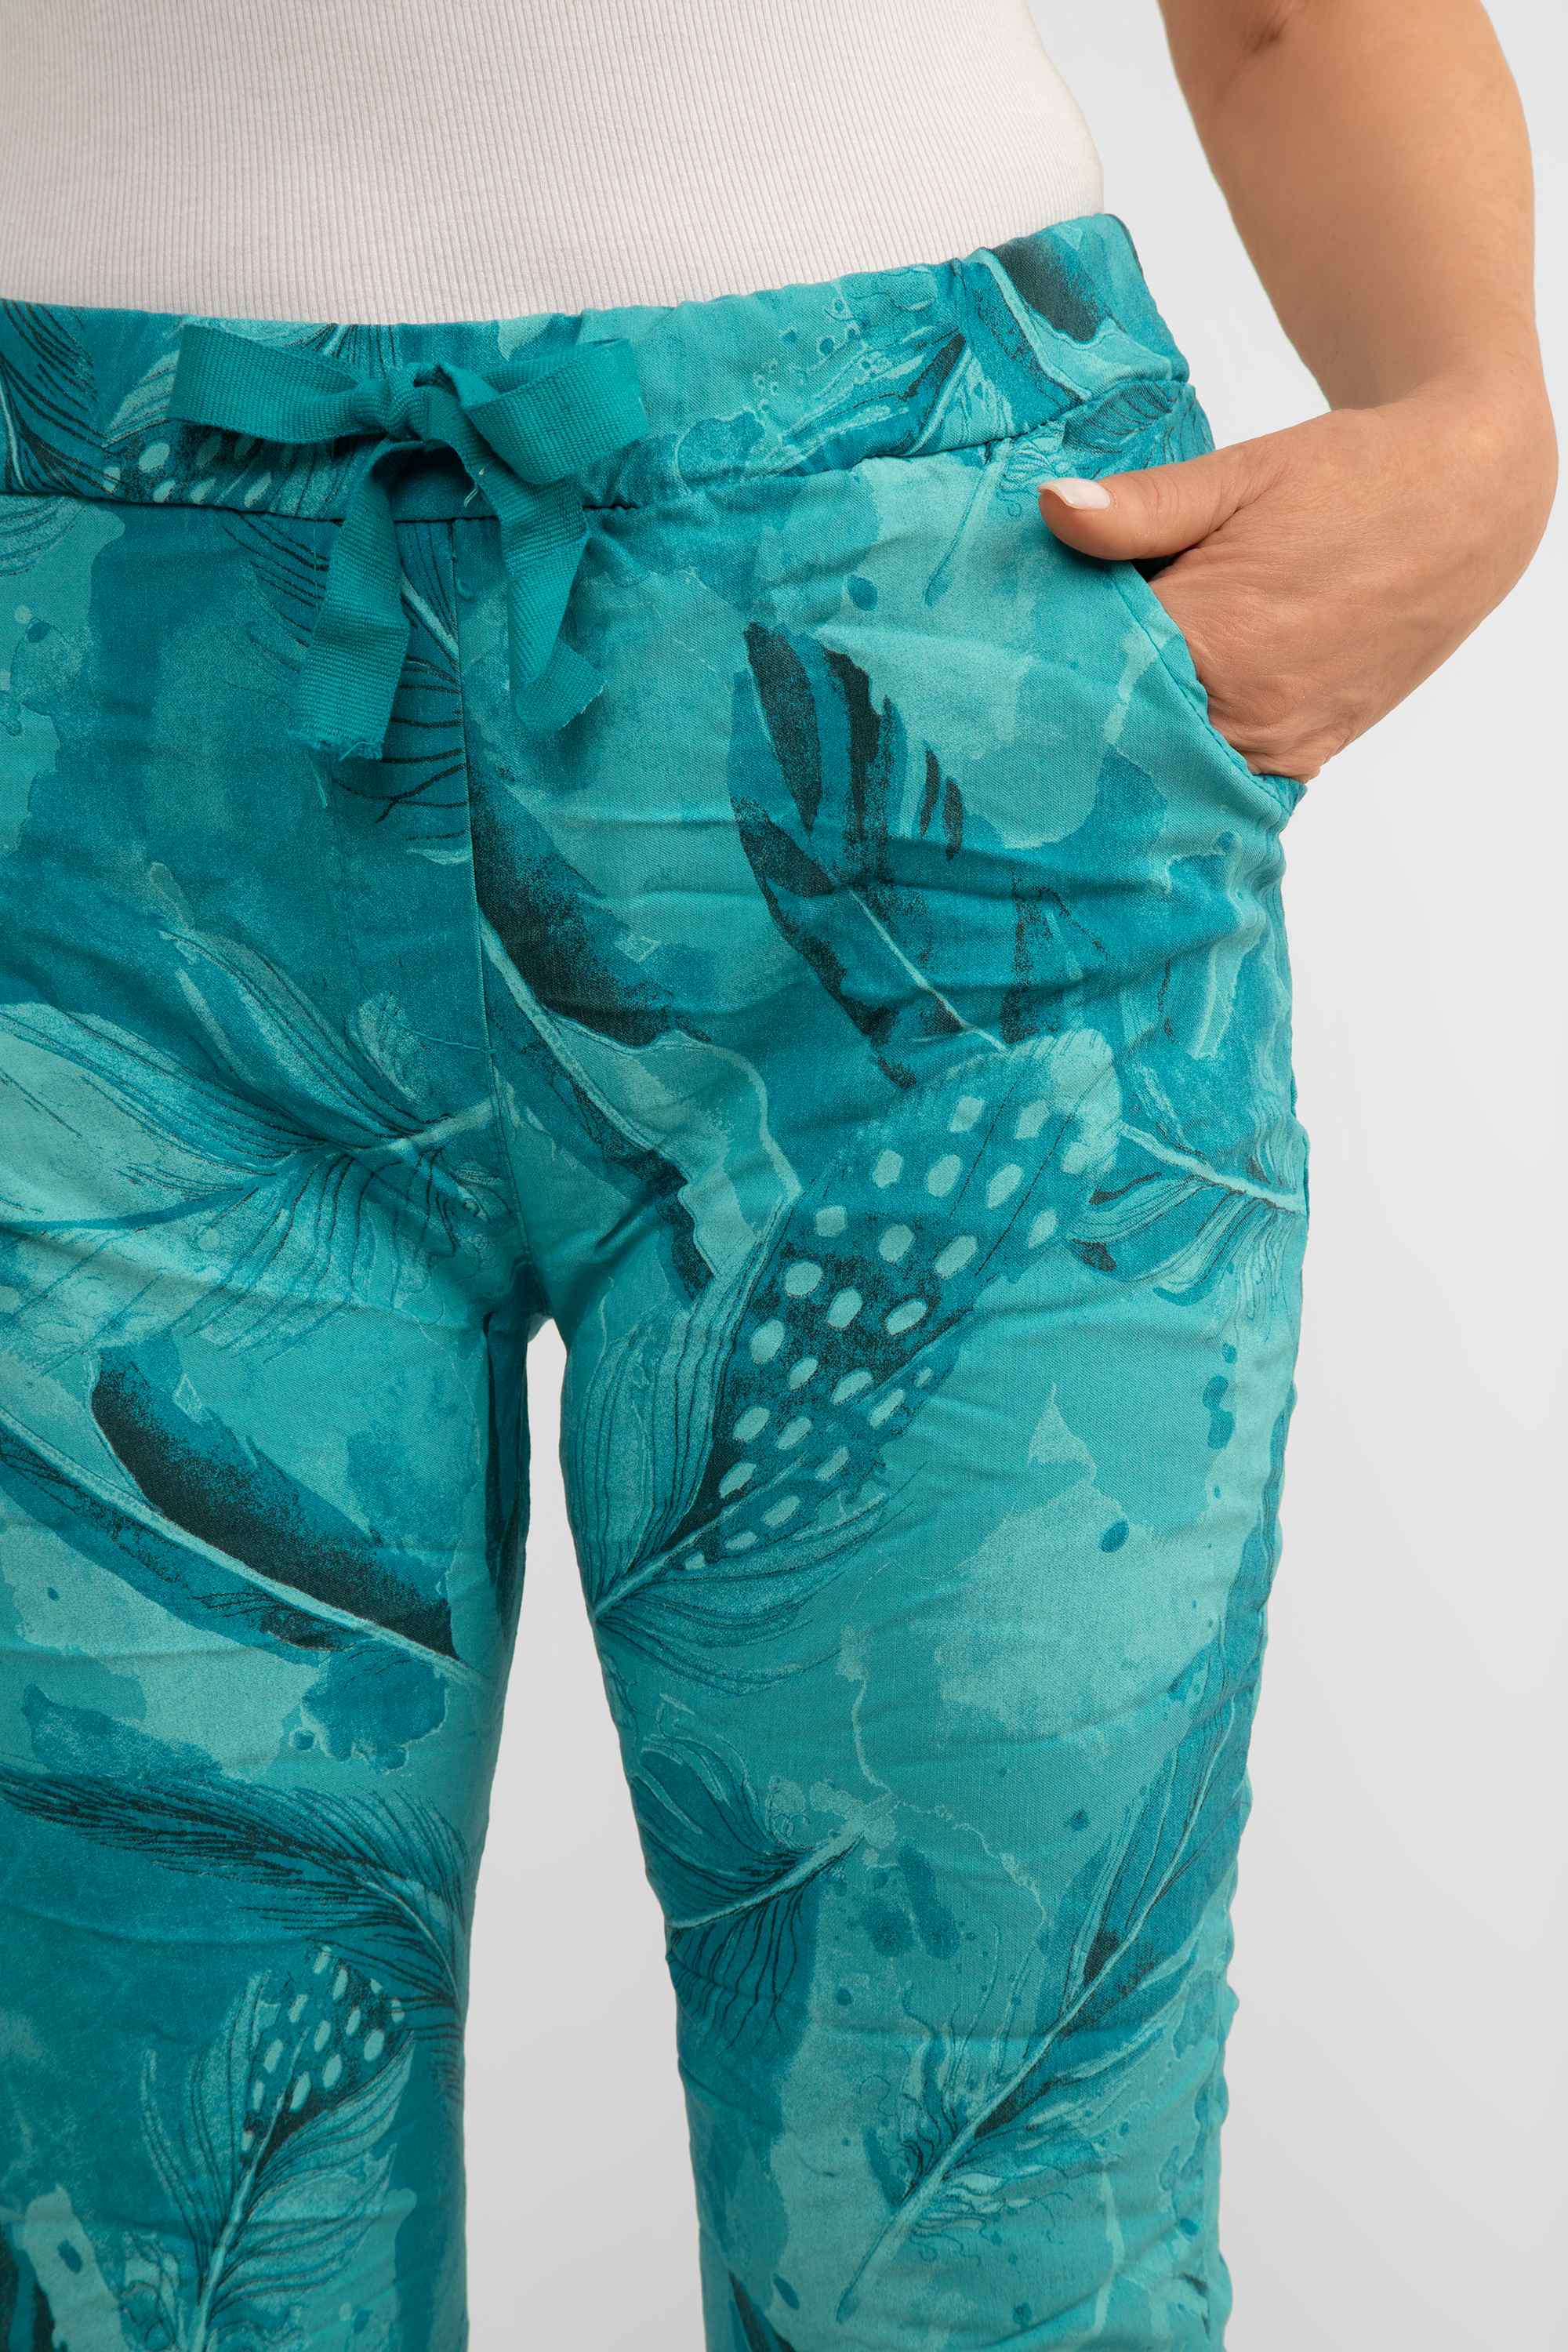 Front close up of Bella Amore (21144) Women's Slim Fit Cropped Crinkle Pants with Side Pockets, Pull-on waist in Teal Feather Print